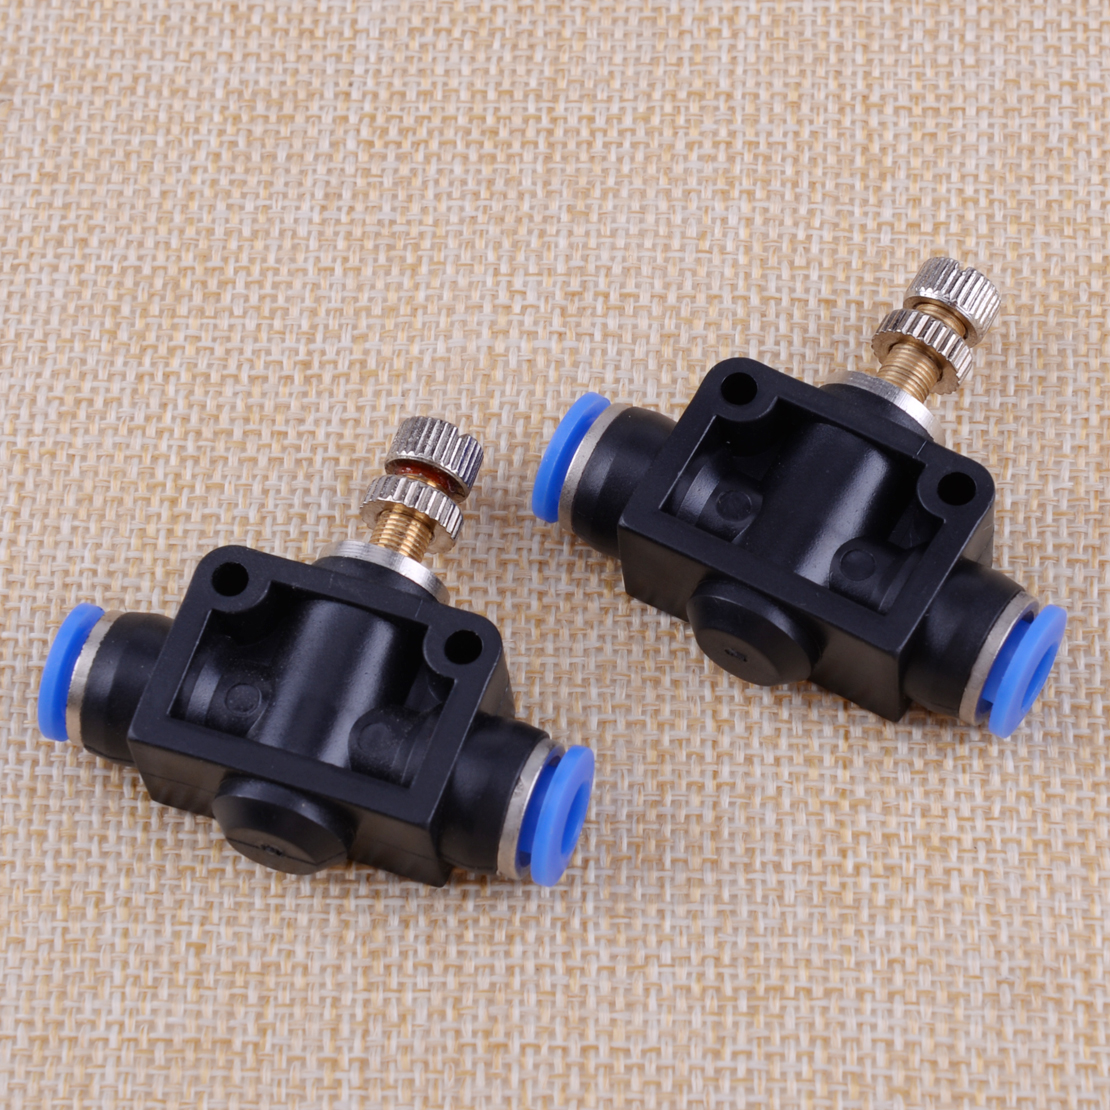 2pcs 6mm Air Flow Speed Control Valve Tube 1//4/" Pneumatic Push In Quick Fitting